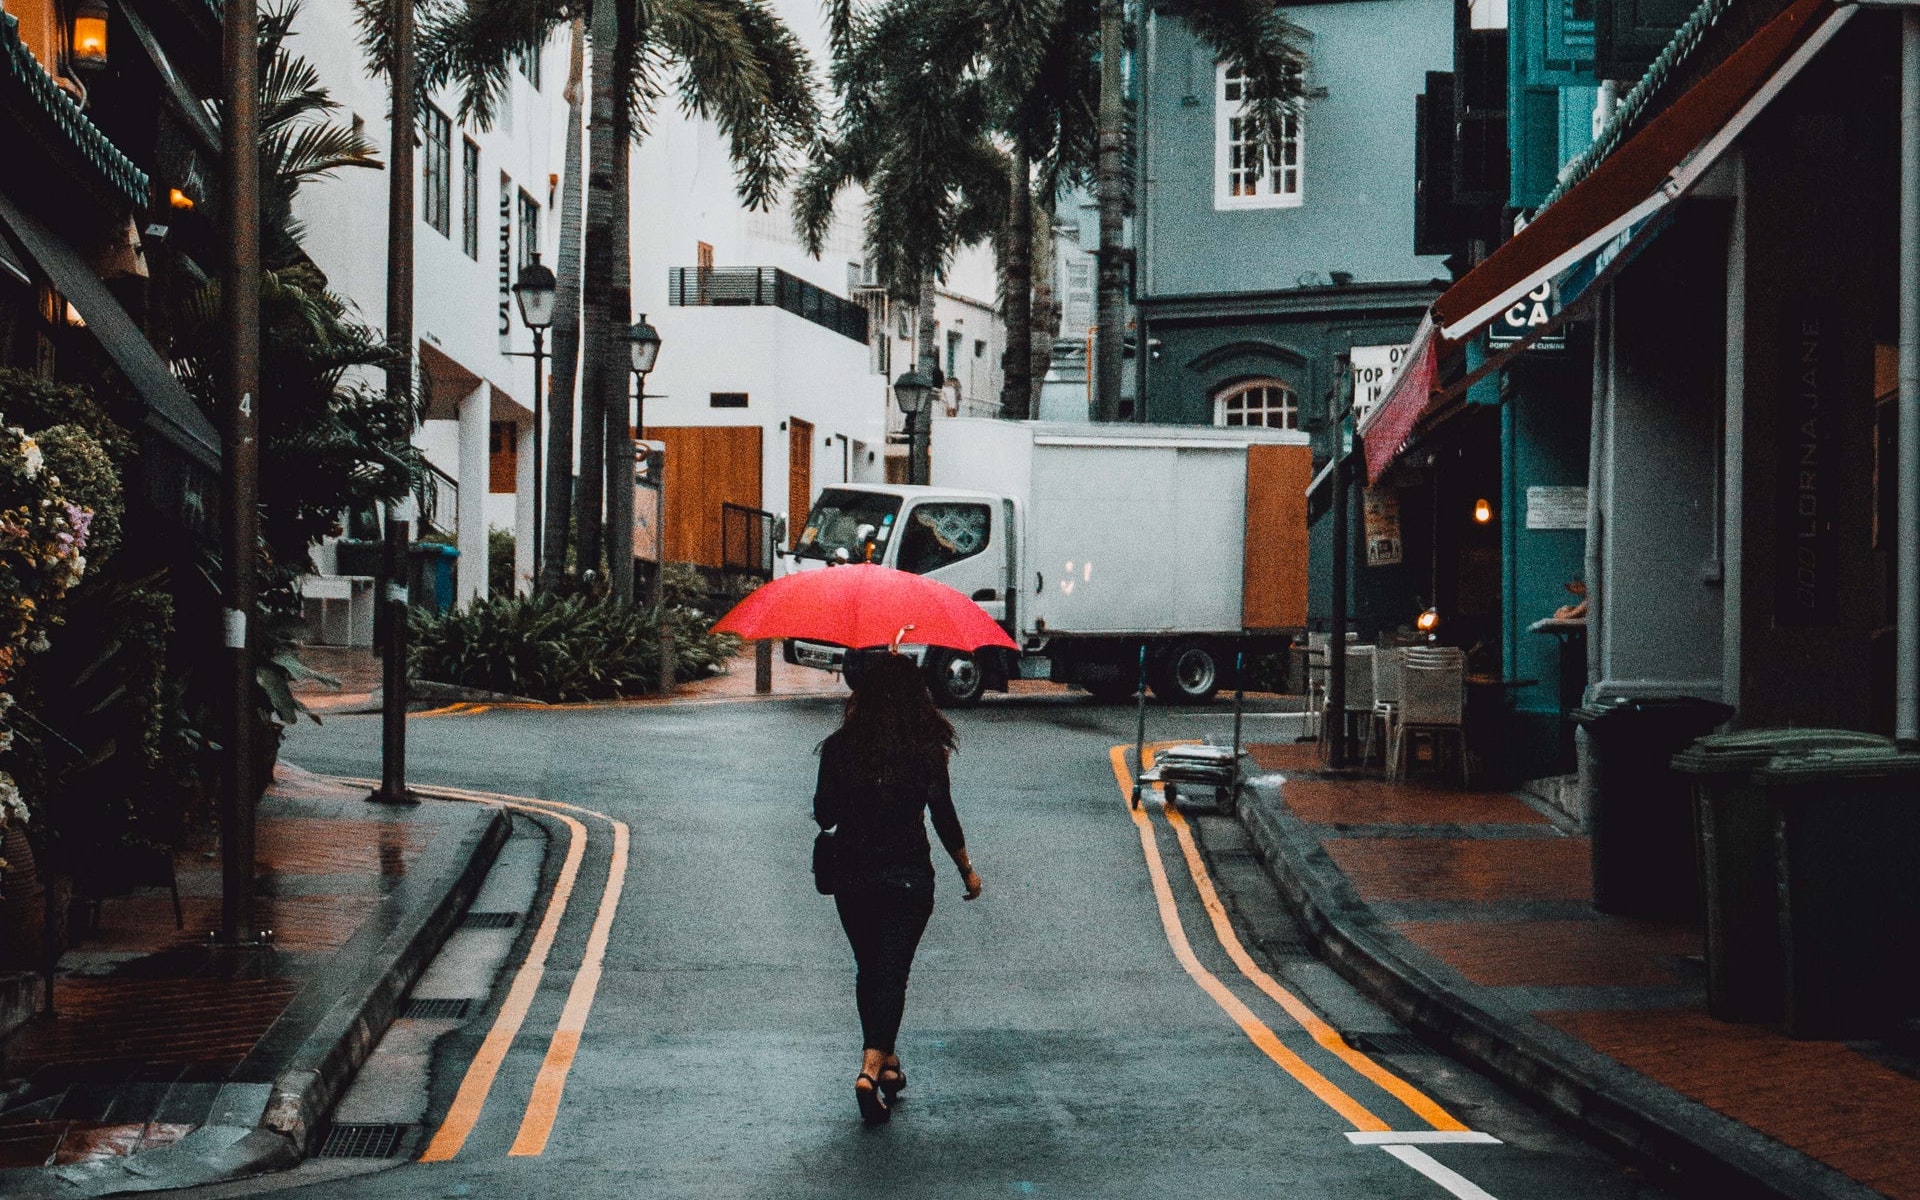 A woman walking down a street with an umbrella in hand